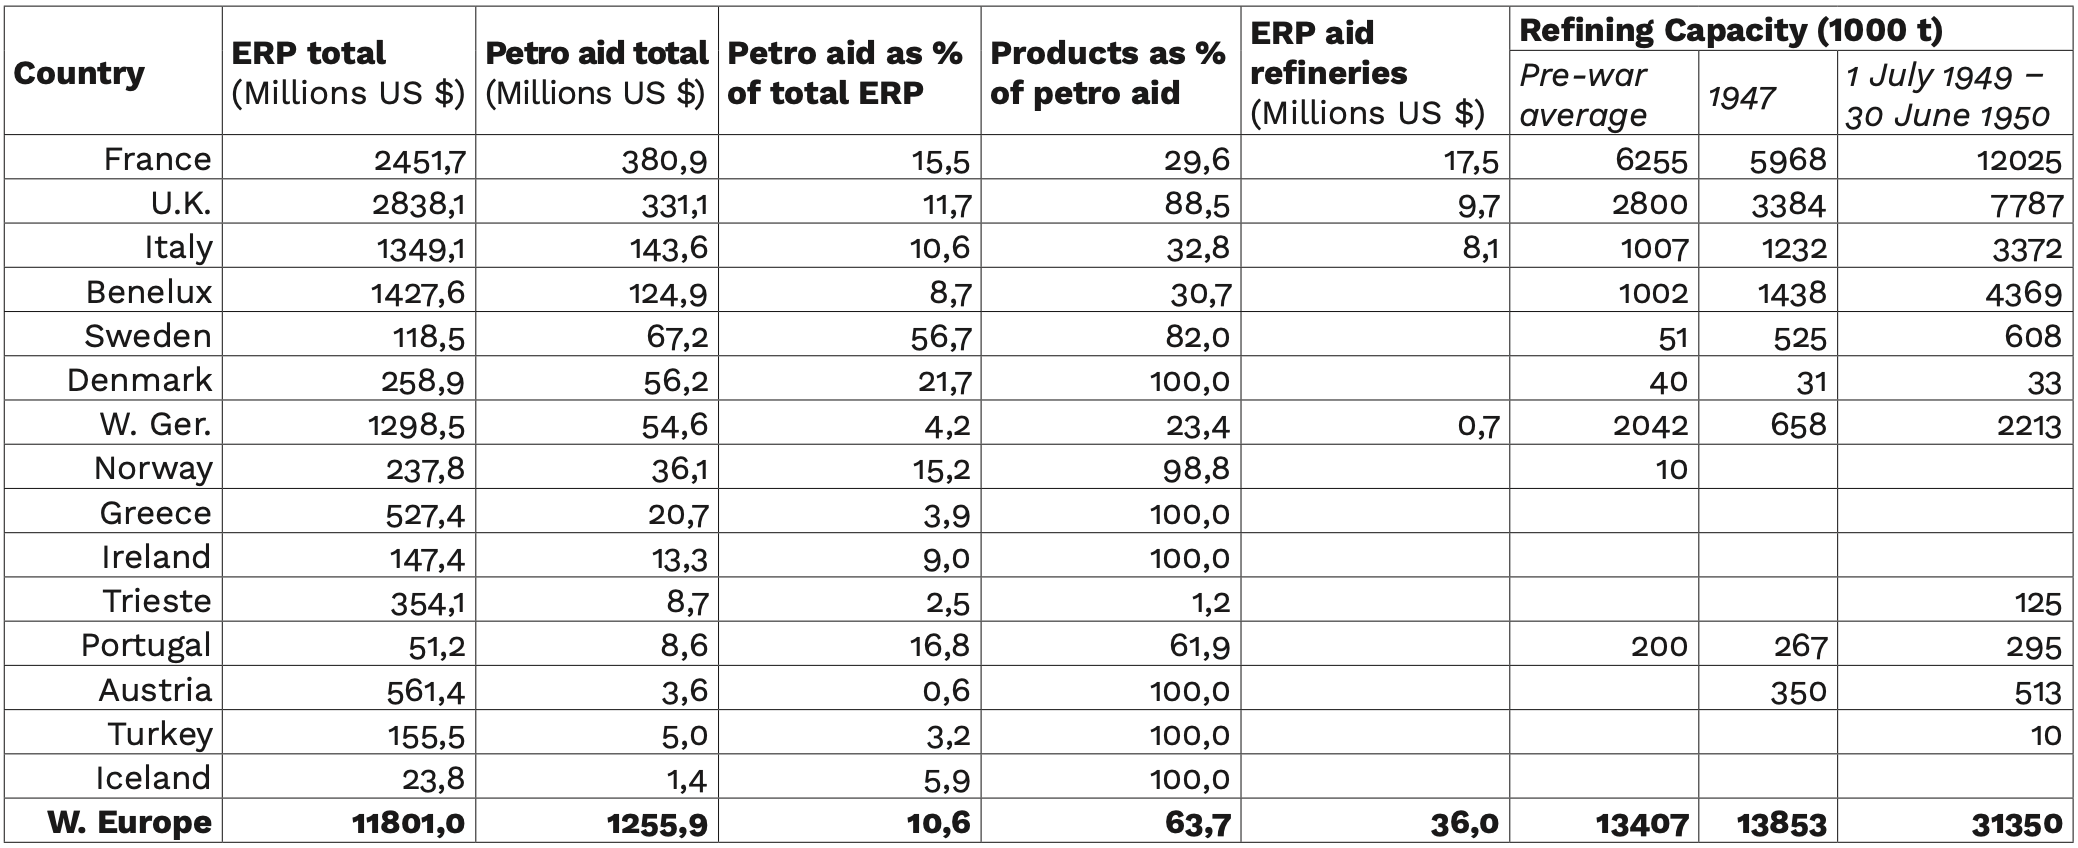 Table 1: ERP aid, paid shipments of crude oil and petroleum products under the framework of the ERP, ERP funding for refineries and the evolution of refinery capacity. All data per country, 1948 to 1951. Sources: Painter, “The Marshall Plan and Oil”, 166 (cf. note 12); Groen, “The Significance of the Marshall Plan”, 93 (cf. note 29); MSA, European Industrial Projects (cf. note 46).